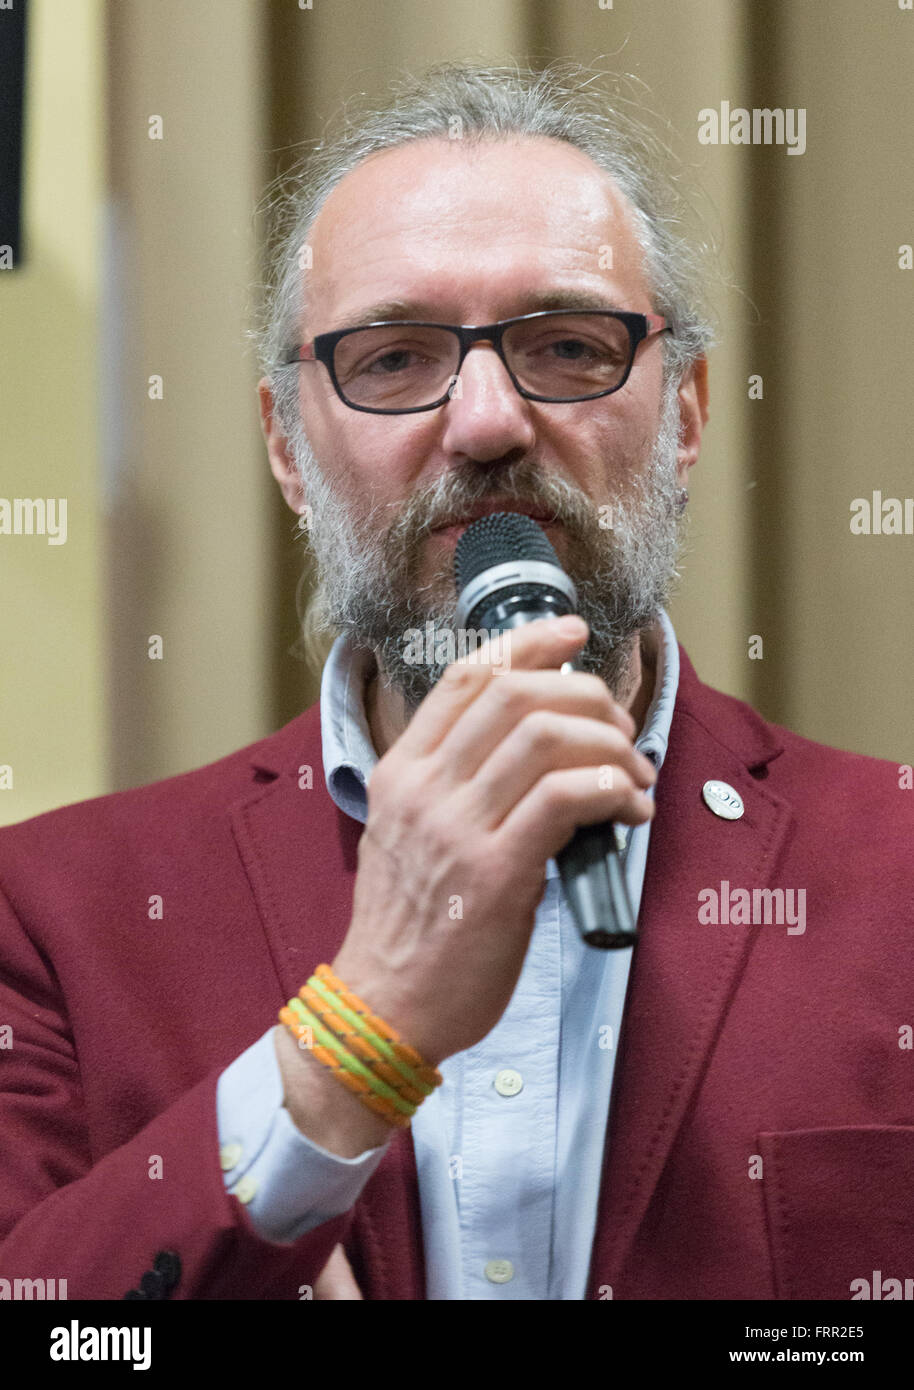 Kielce, Poland. 23rd Mar, 2016. A meeting with Mateusz Kijowski, the founder of the Committee for the Defence of Democracy in Poland, one of the main resistance powers that stands against current rightwing goverment in Kielce, Poland. Credit:  Dominika Zarzycka/Alamy Live News Stock Photo